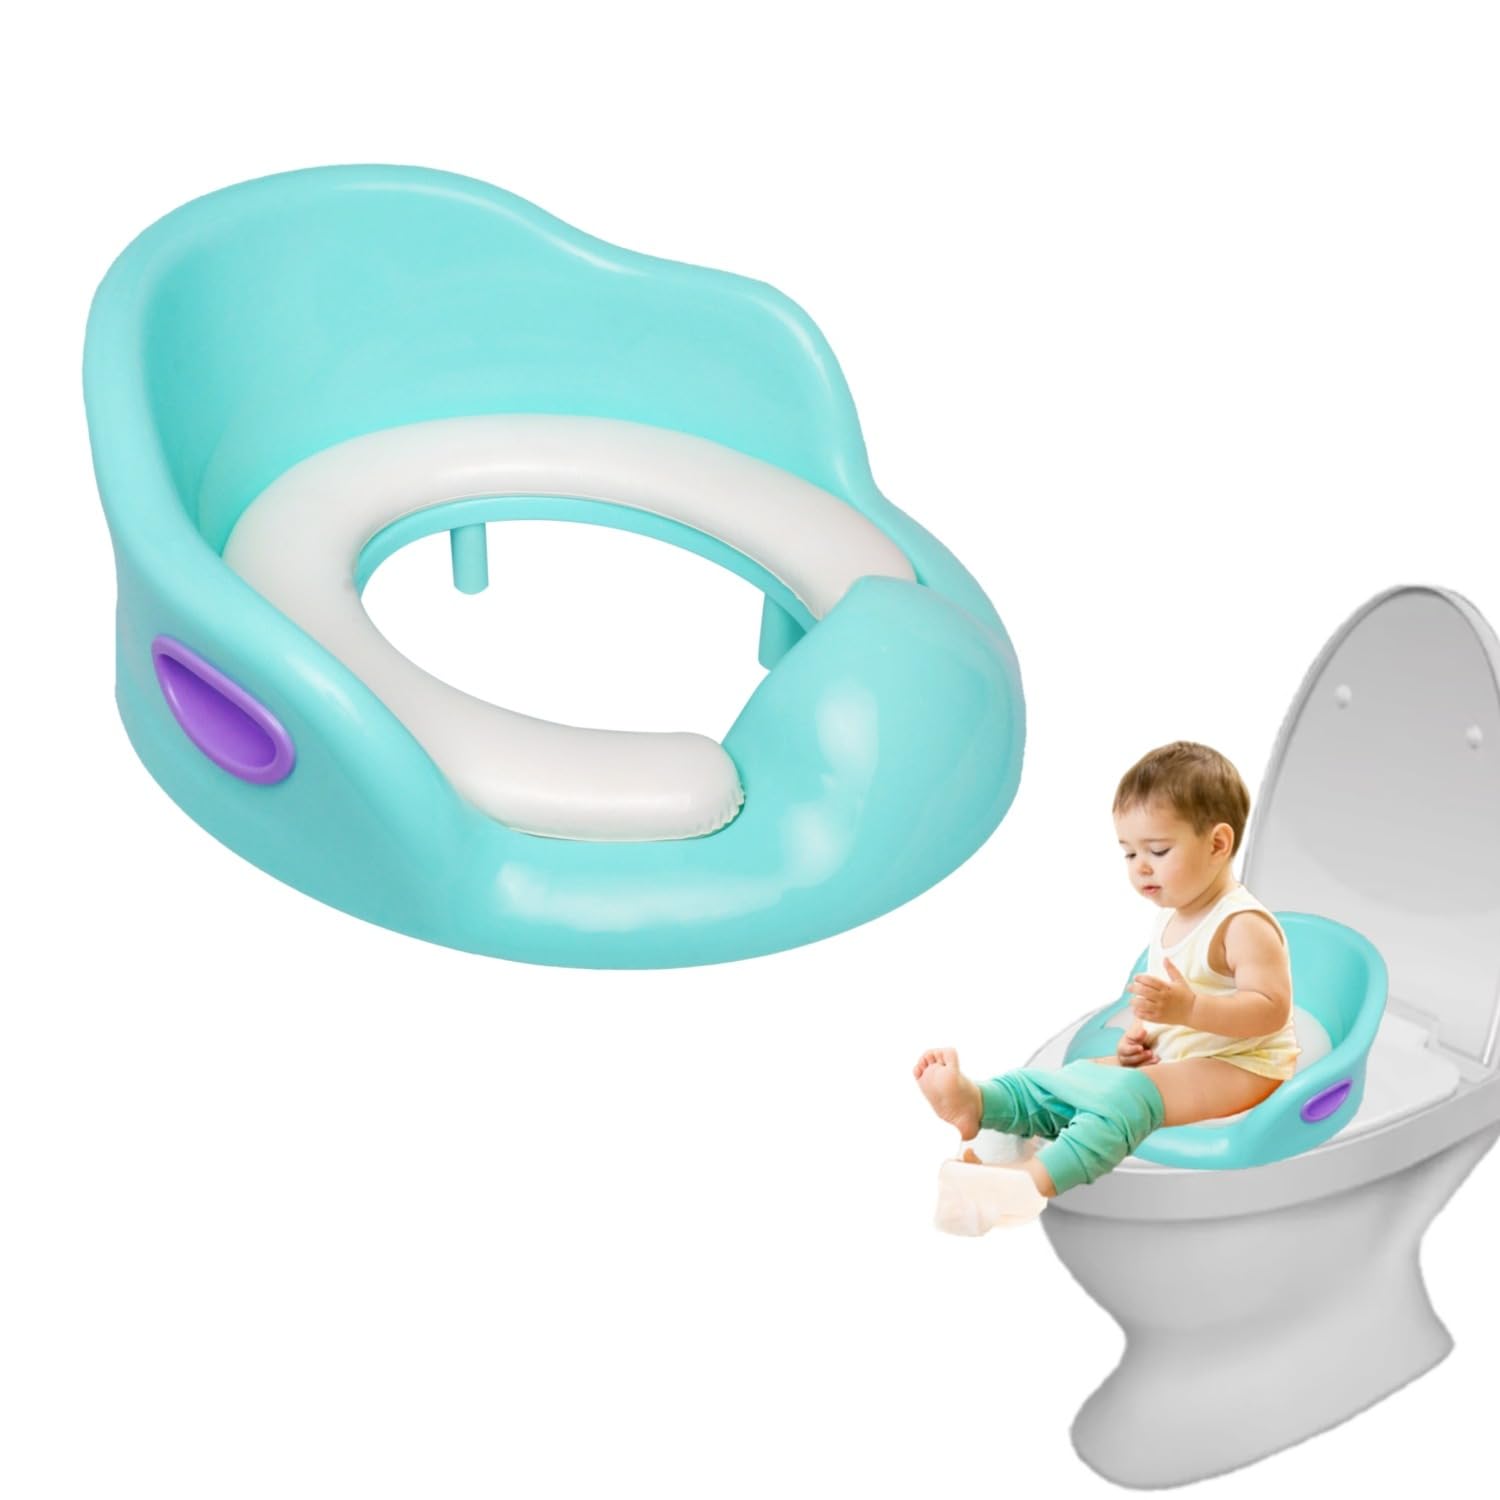 western toilet seat for babies Colored toilet seat covers cost